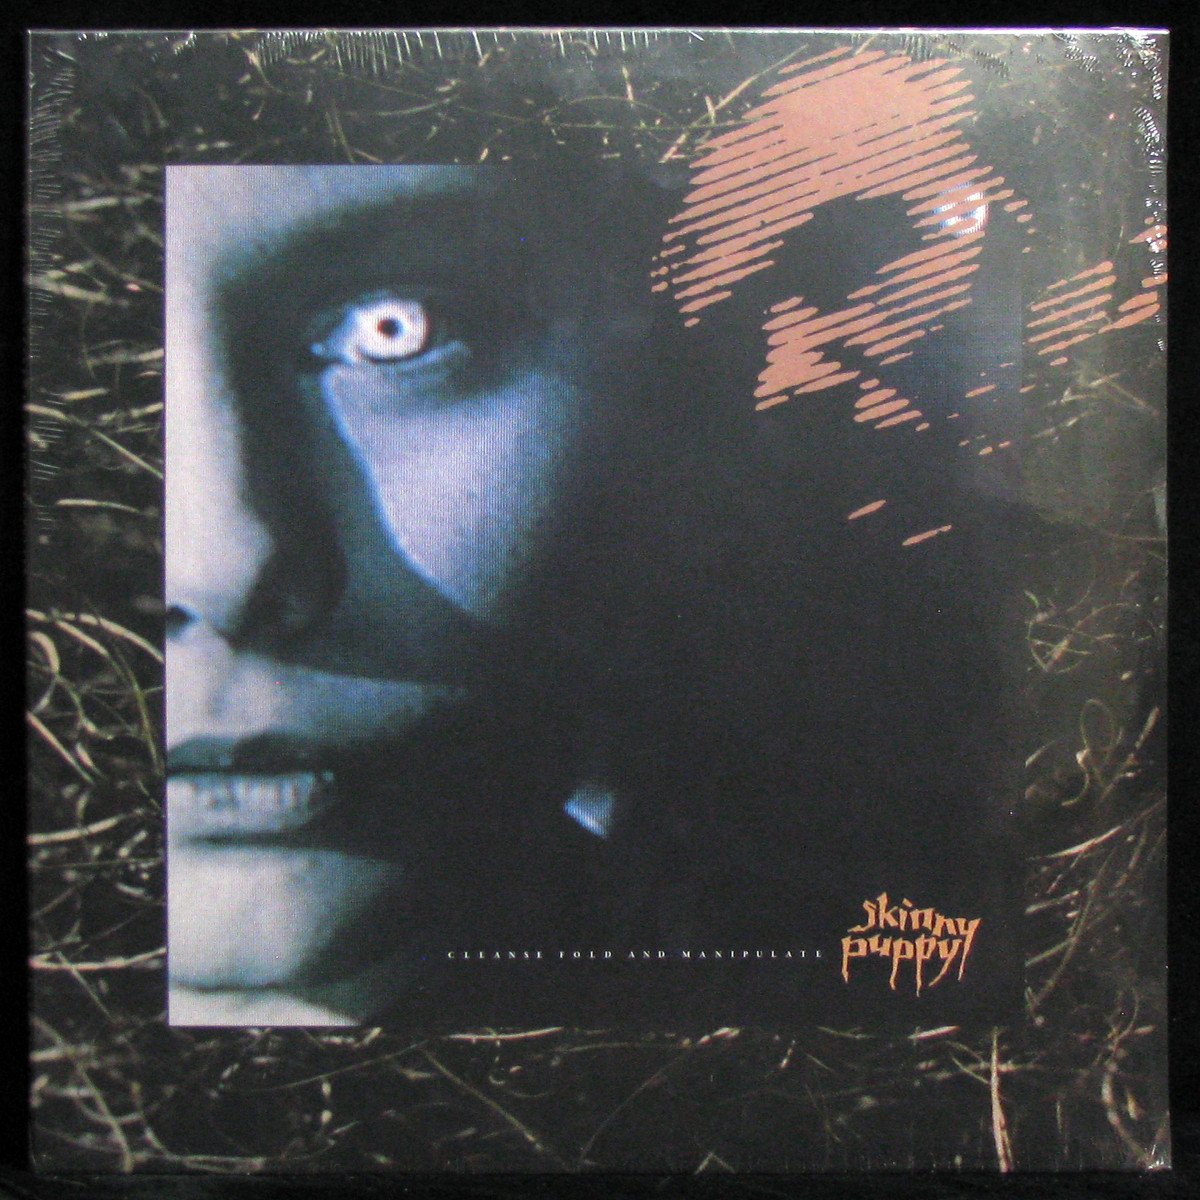 LP Skinny Puppy — Cleanse Fold And Manipulate фото